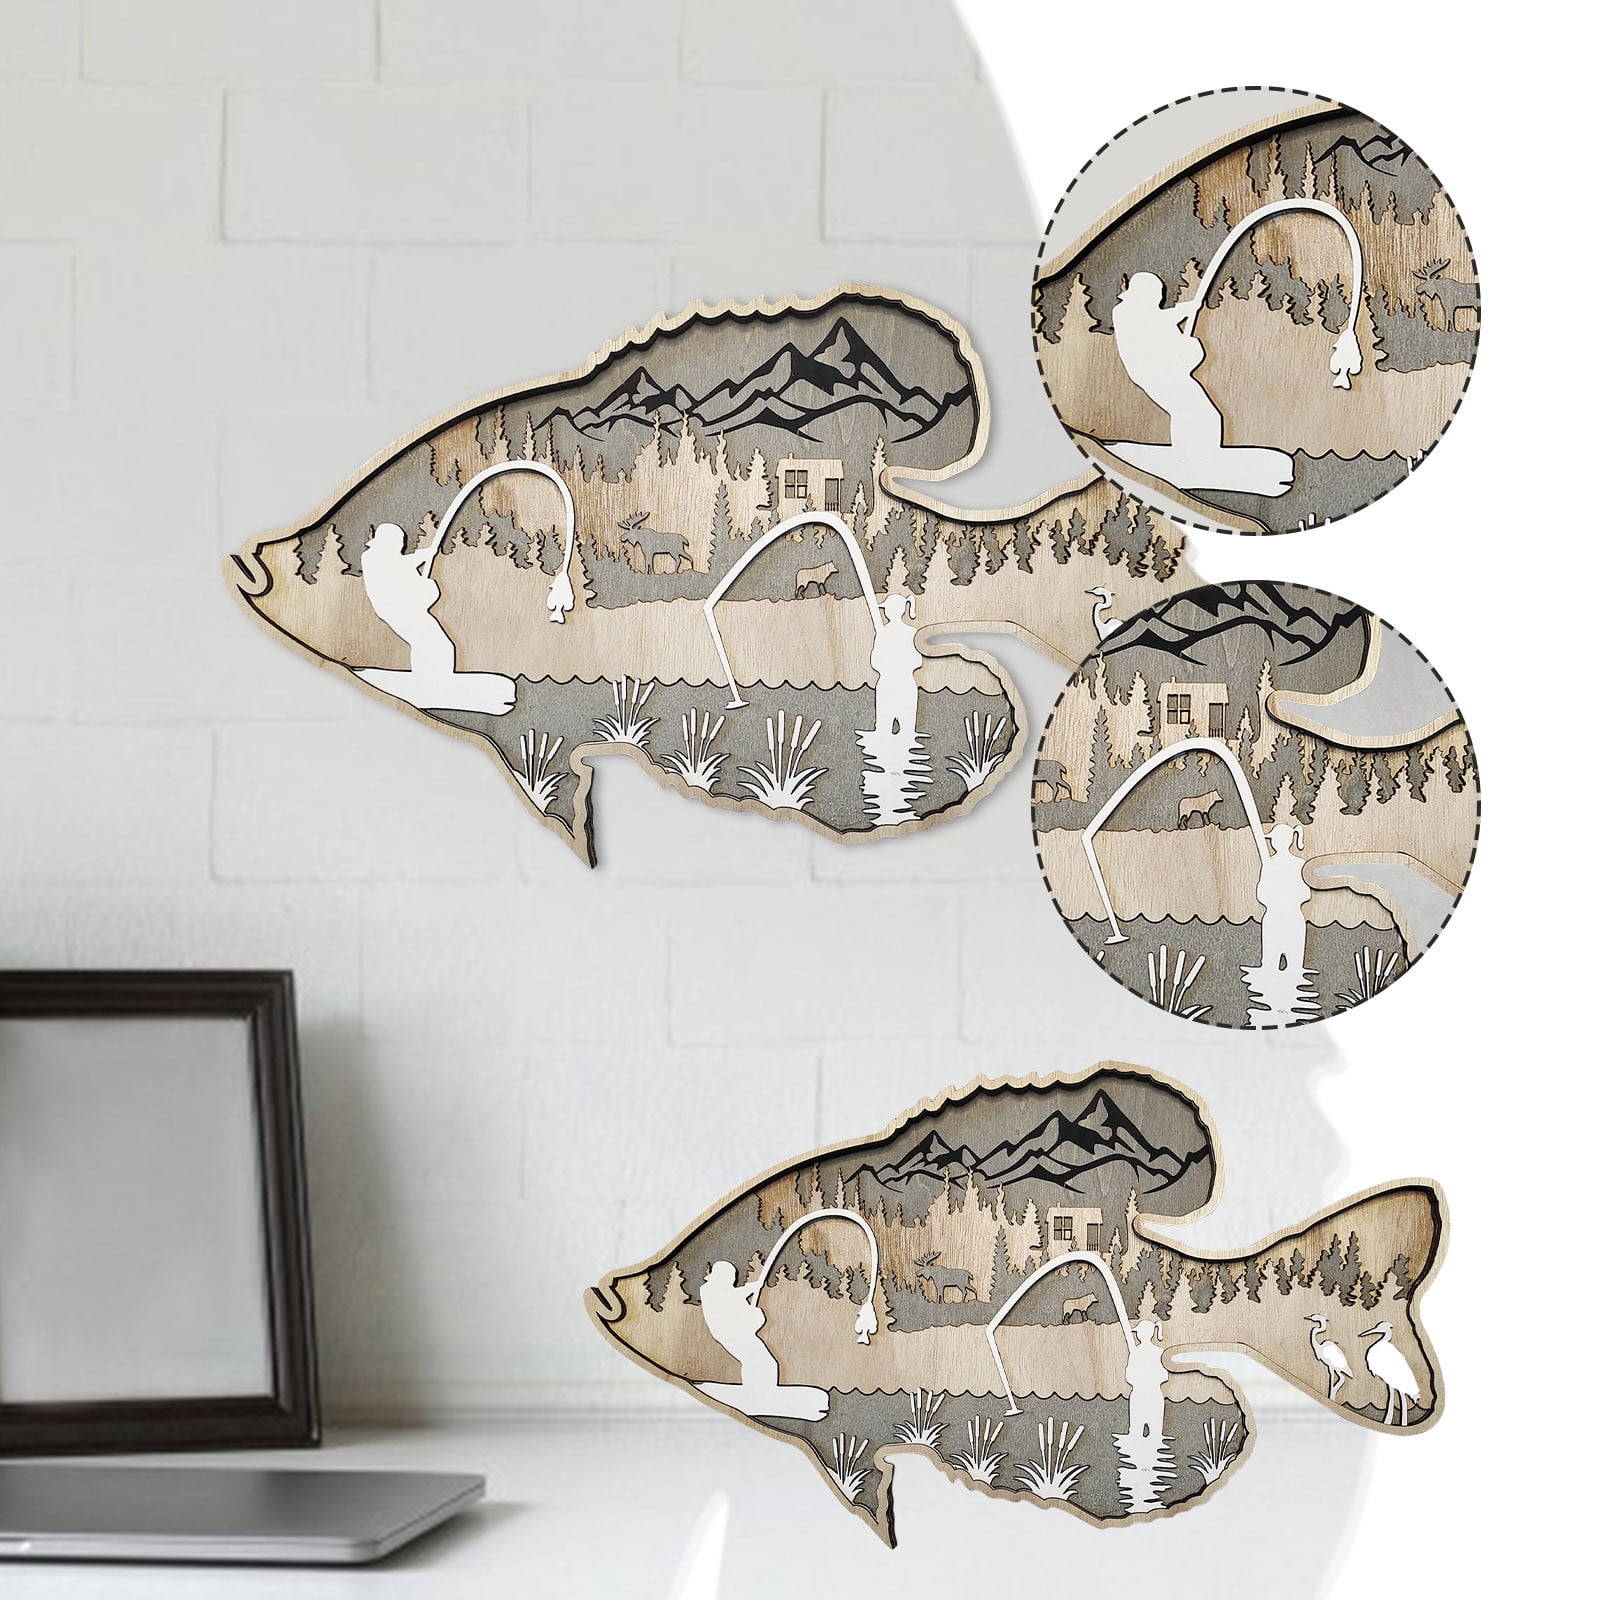 Hot Sale！6 Layer Large Mouth Bass Fish Wall Decor,Wooden Large Mouth Bass  for Wall,Bass Sculpture,Crappie Fish Decoration,Bass Wall Art Decor,for  Home,Shop,Cafe, Hotel,Bar Artware Decoration 